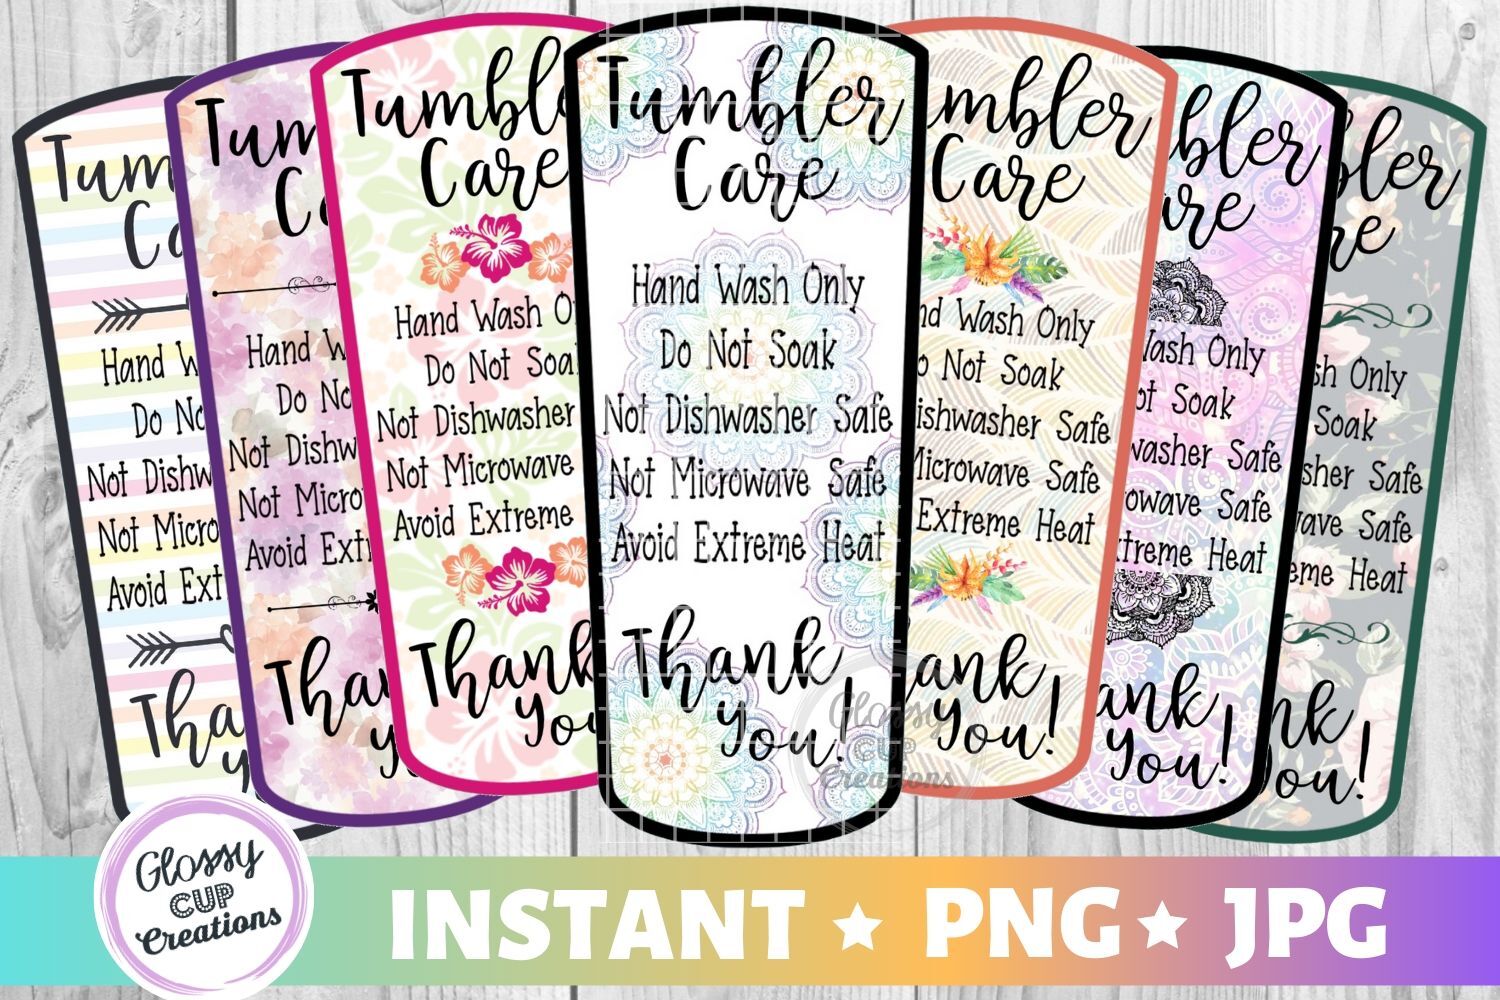 Free Printable Care Cards For Tumblers Free Printable Care Cards For Your Silhouette Or Cricut